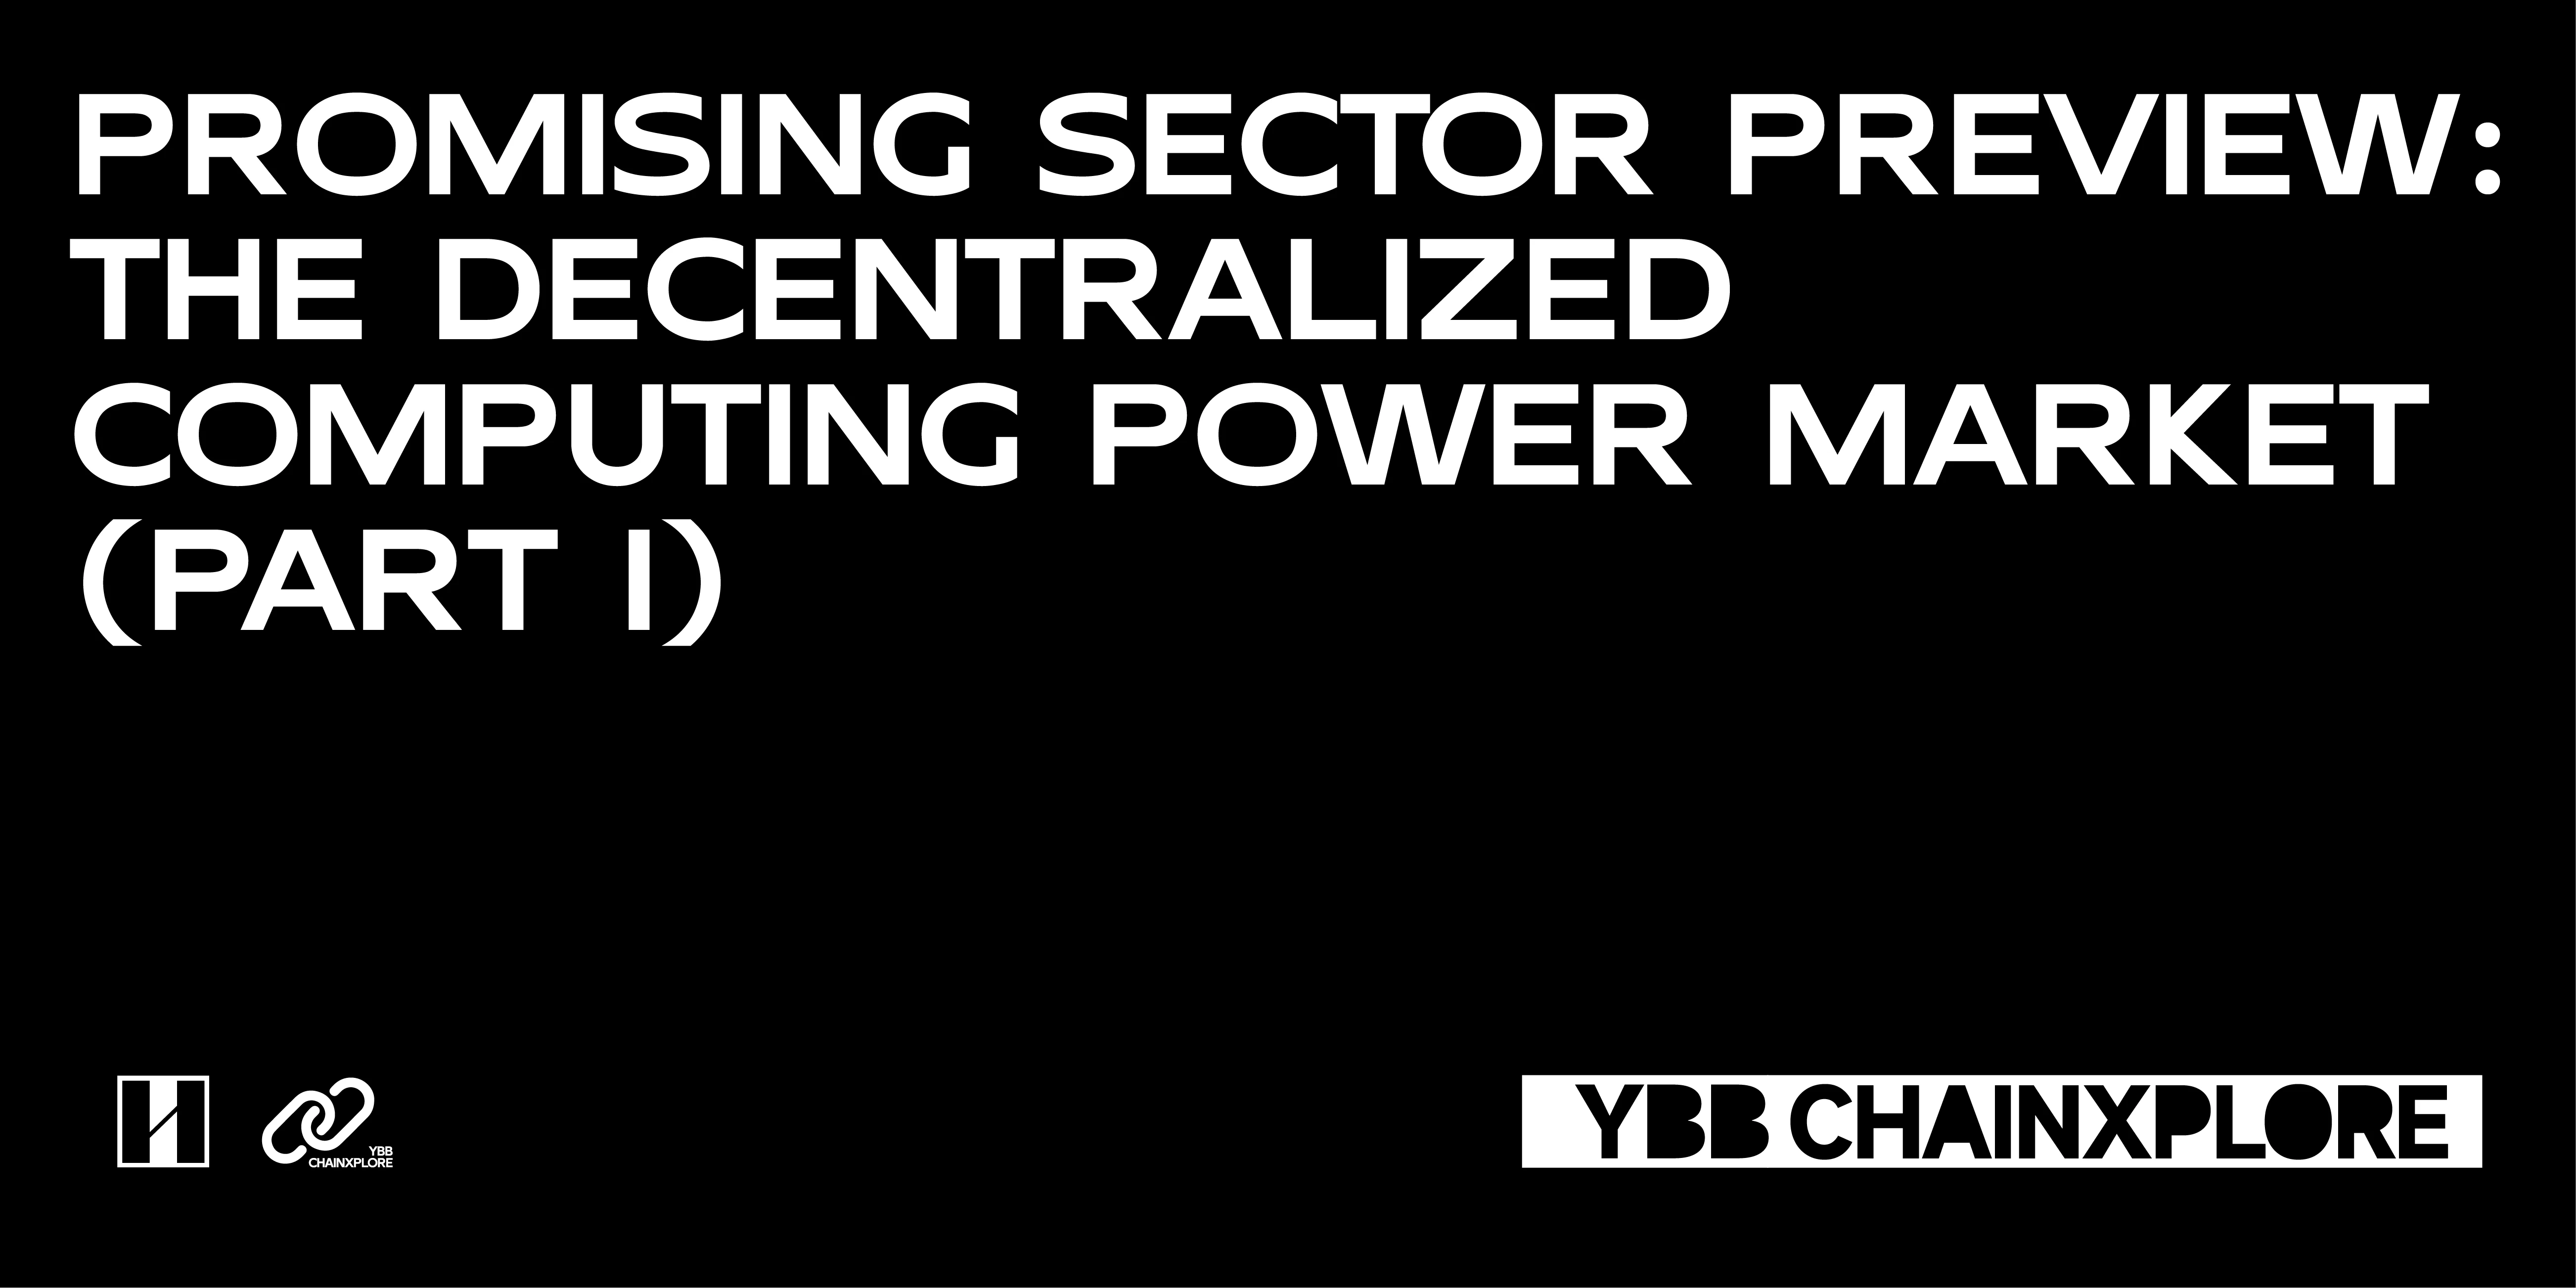 YBB Capital: Preview of Potential Track - Decentralized Computing Power Market (Part 1)